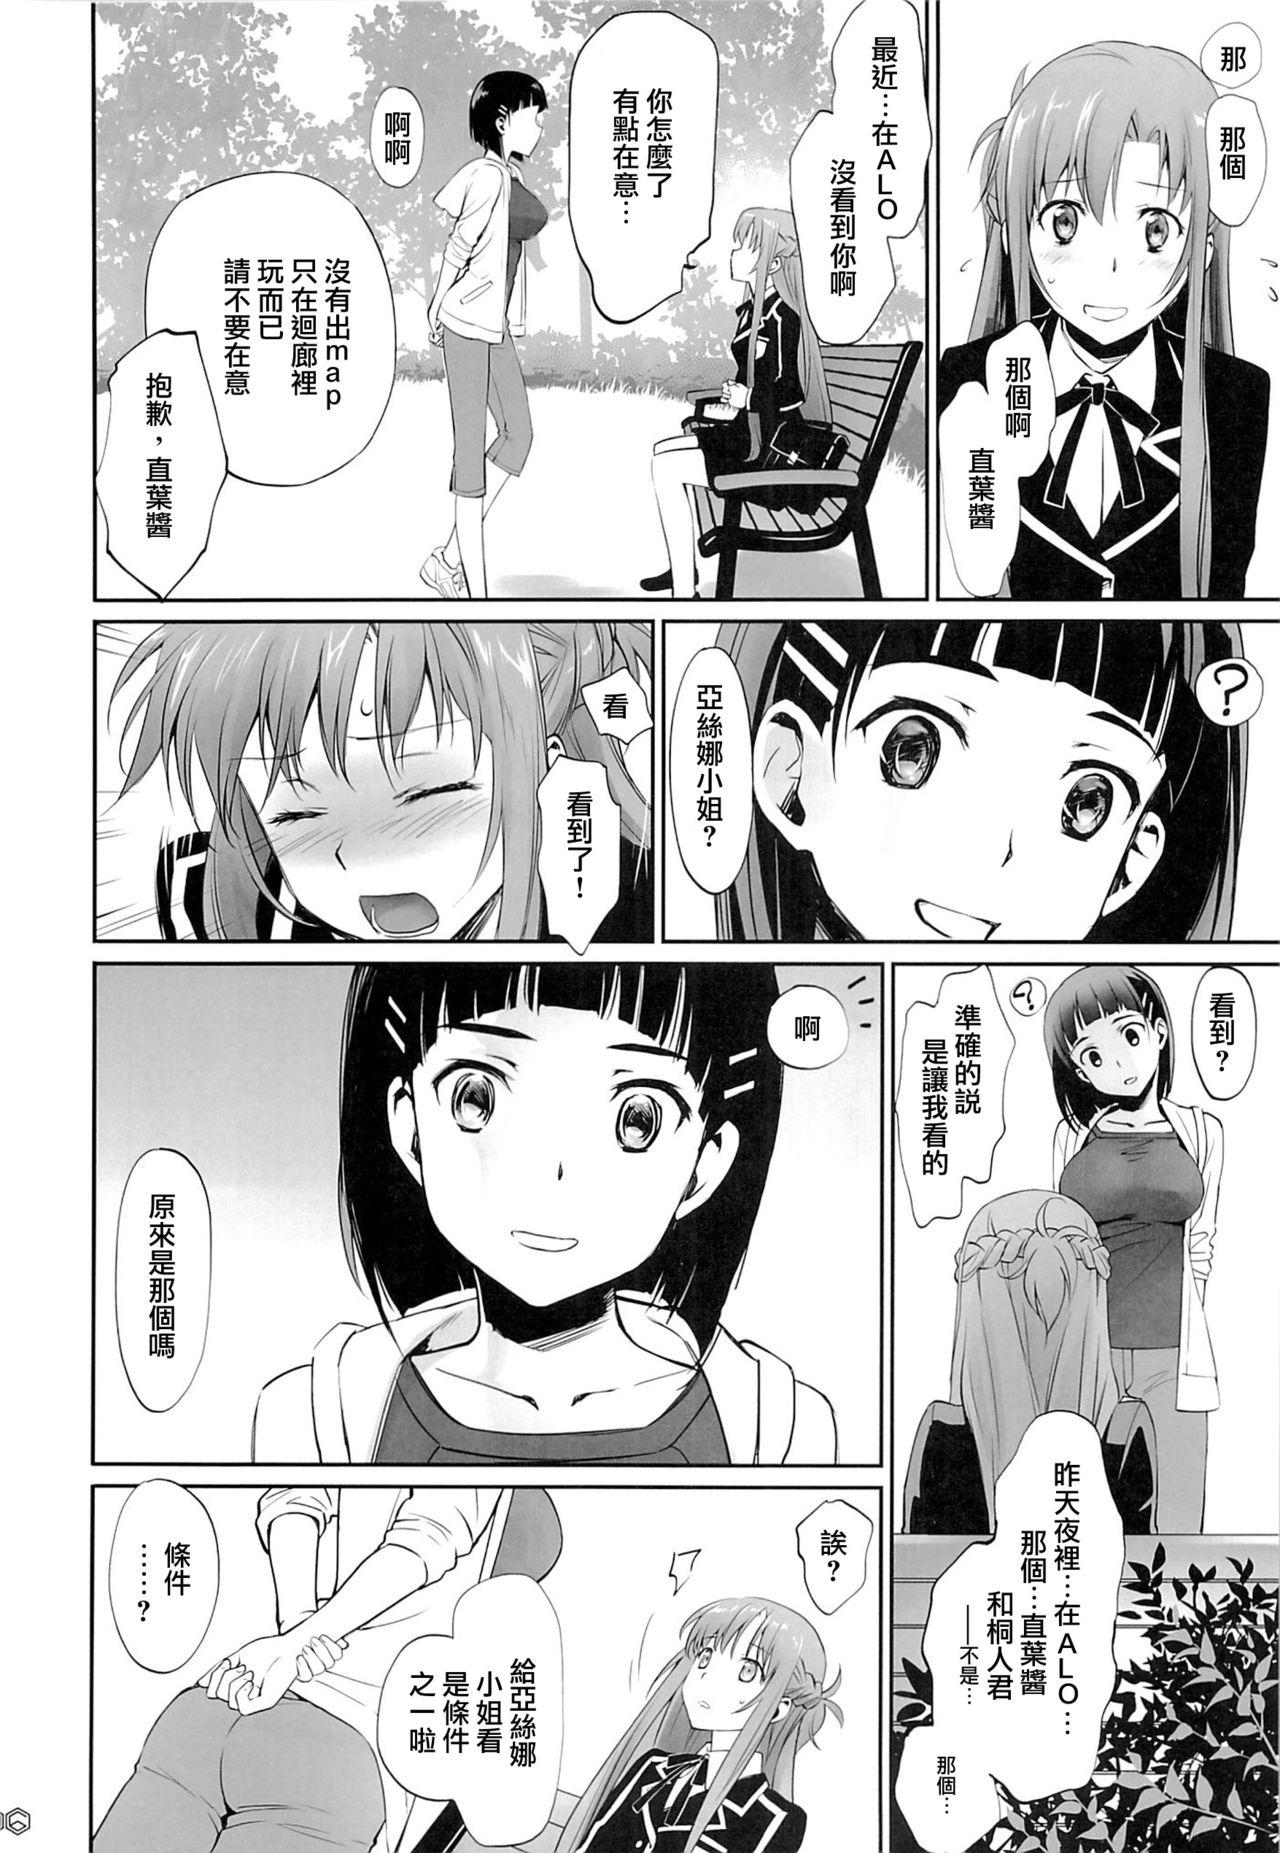 Chileno turnover - Sword art online College - Page 5